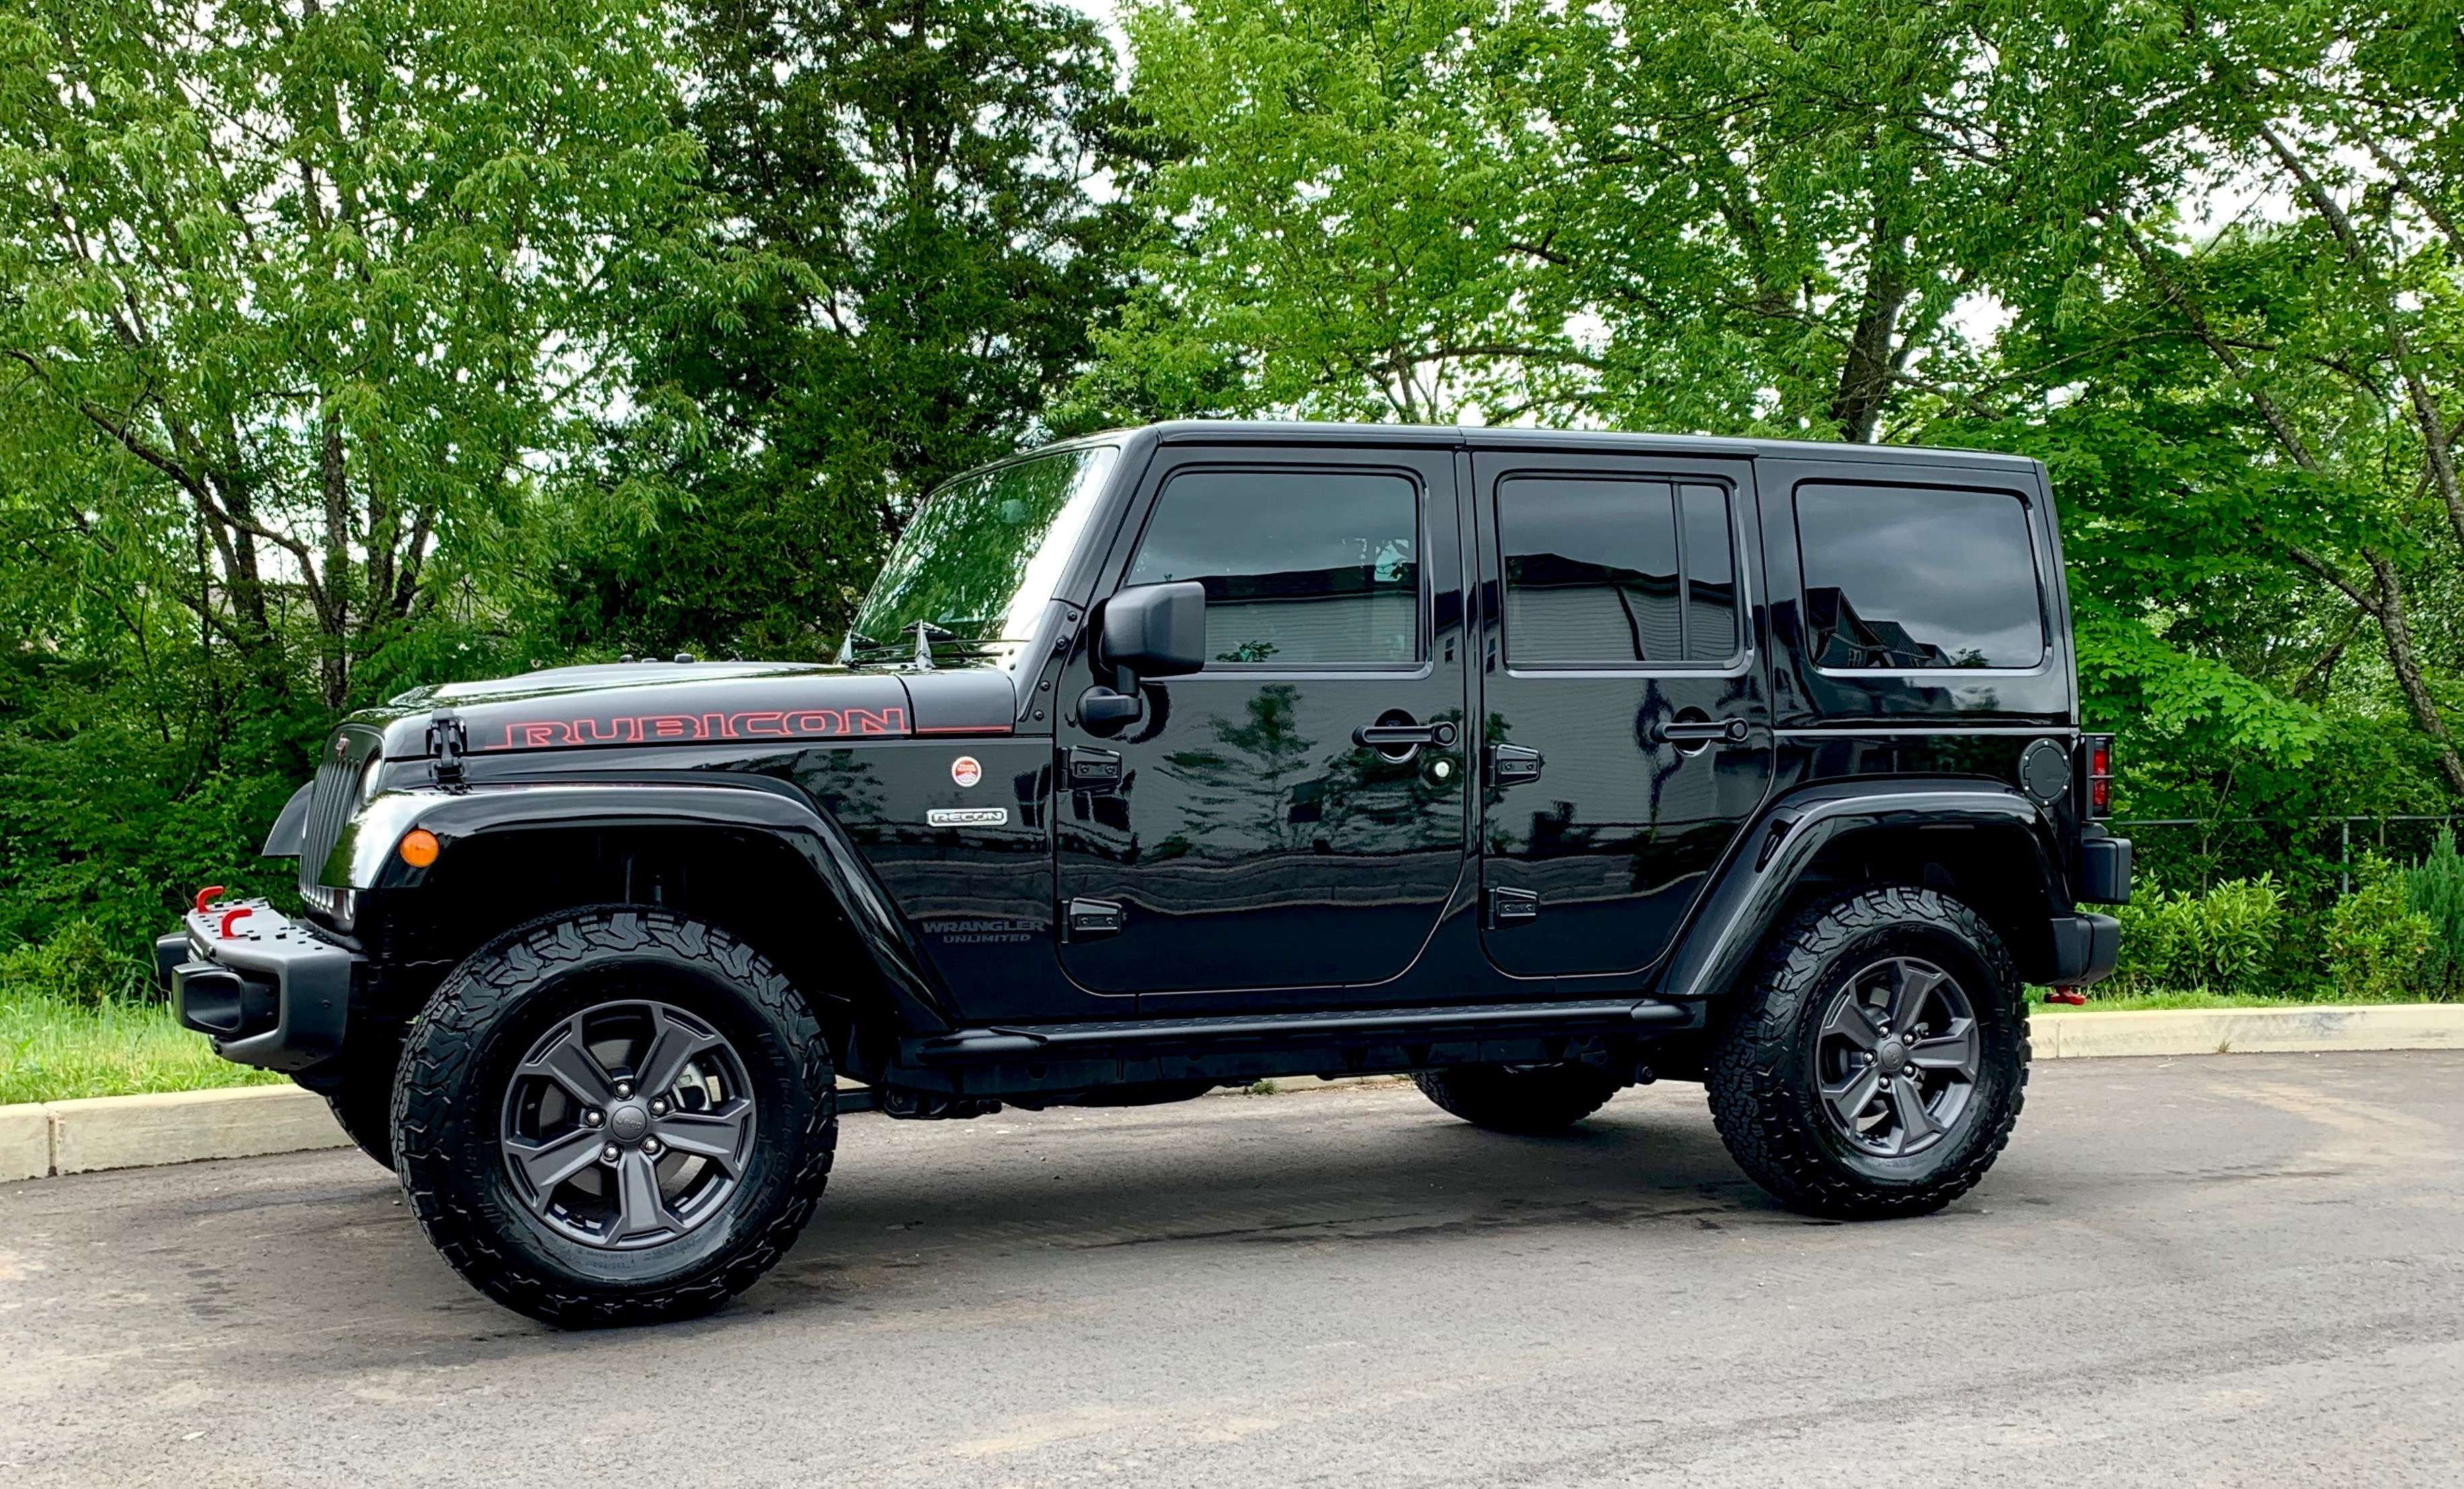 Show us your Black Beauty :) - Page 98 - Jeep Wrangler Forum